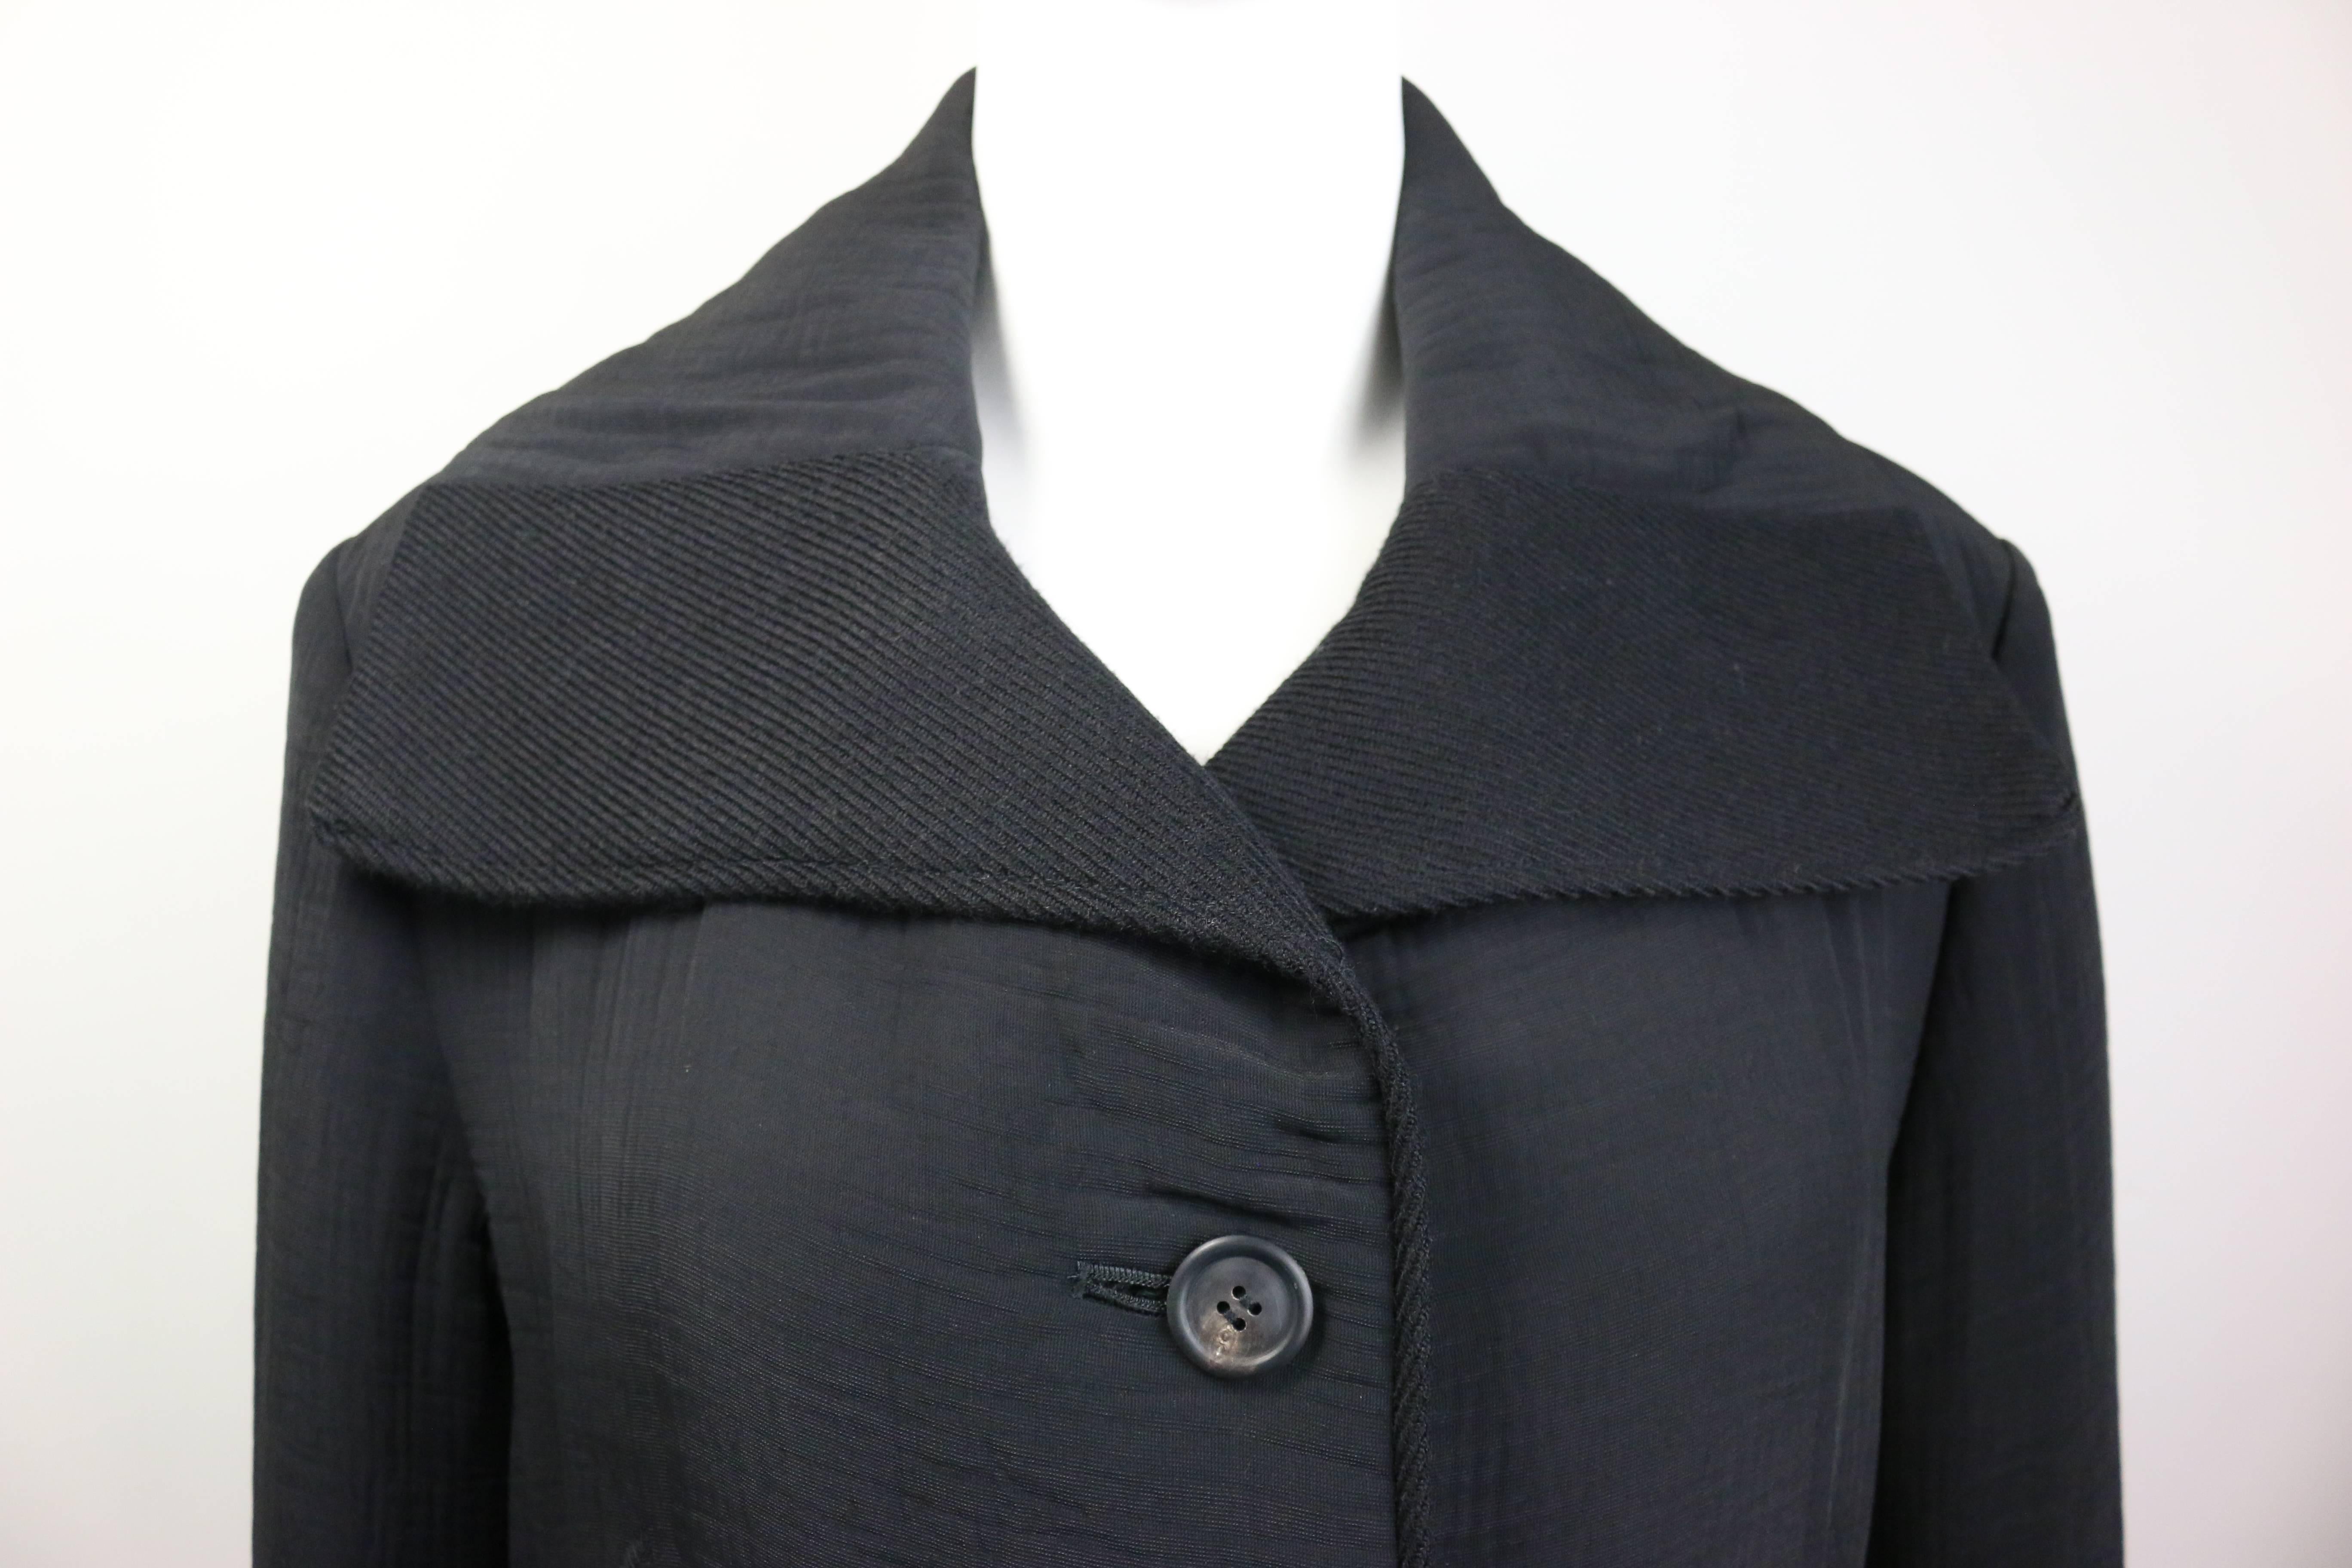 - VIntage 90s Issey Miyake black maxi coat. 

- Featuring a black wool wide collar. Six front buttons fastening. Two side pockets. 

- Fully lined. 

- 50% Polyester, 50% Rayon. Collar: 100% Wool. 

- Made in Japan. 

- Size S. 